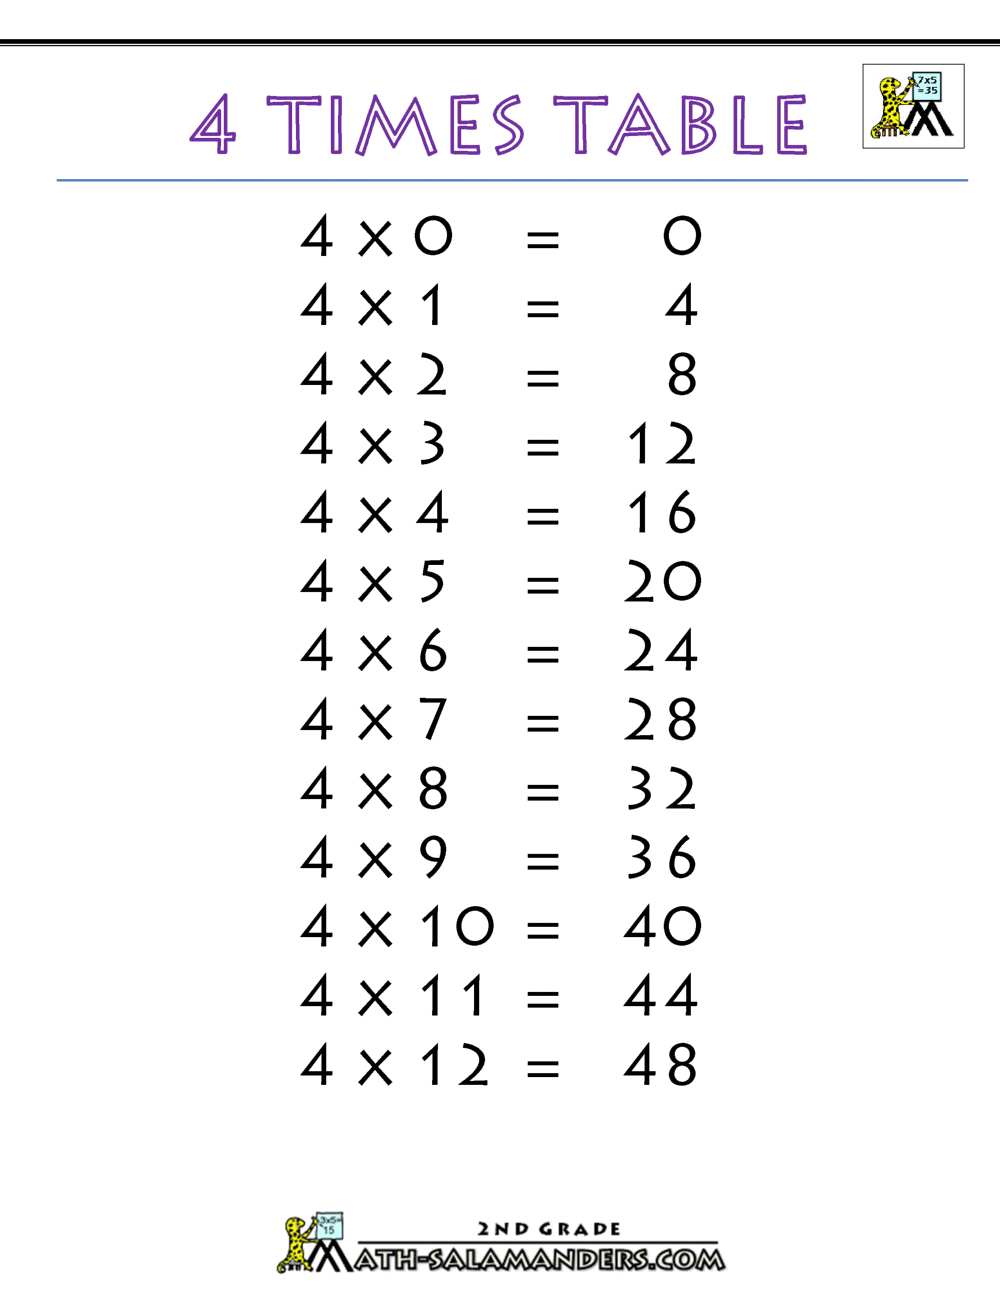 multiplying-1-to-12-by-6-100-questions-a-grade-3-multiplication